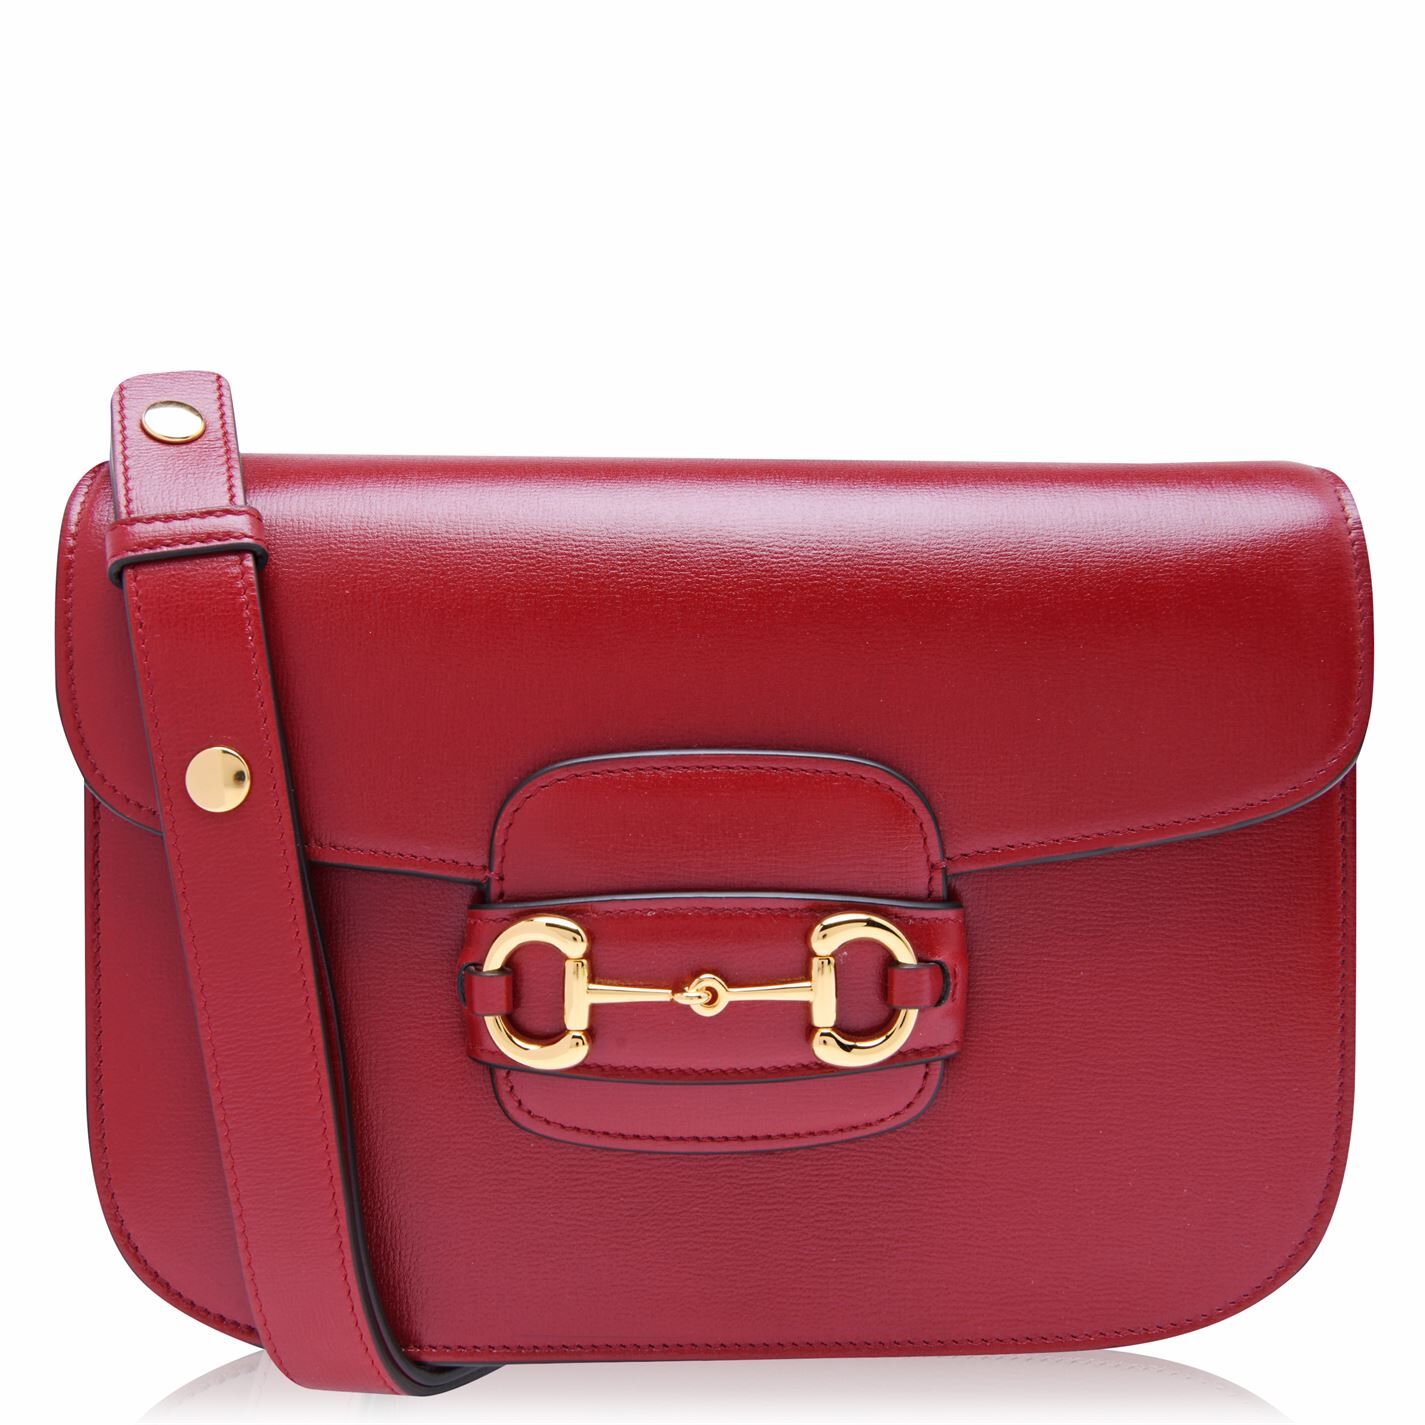 Gucci 1955 horsebit in red leather